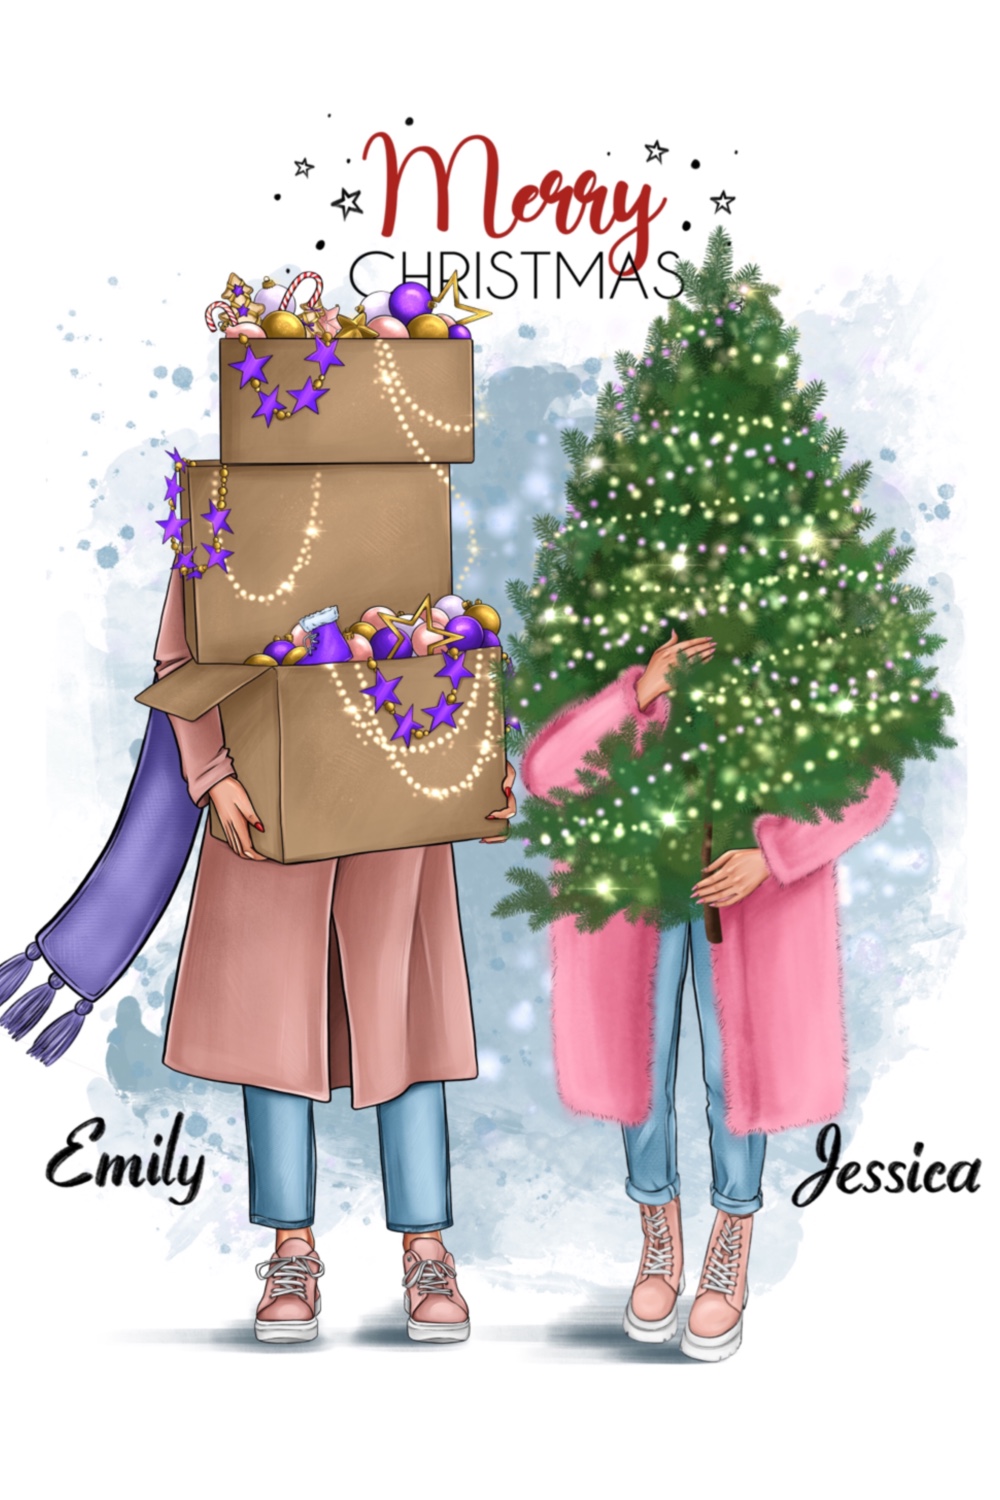 Drawsn girls with gift boxes and a Christmas tree in their hands.